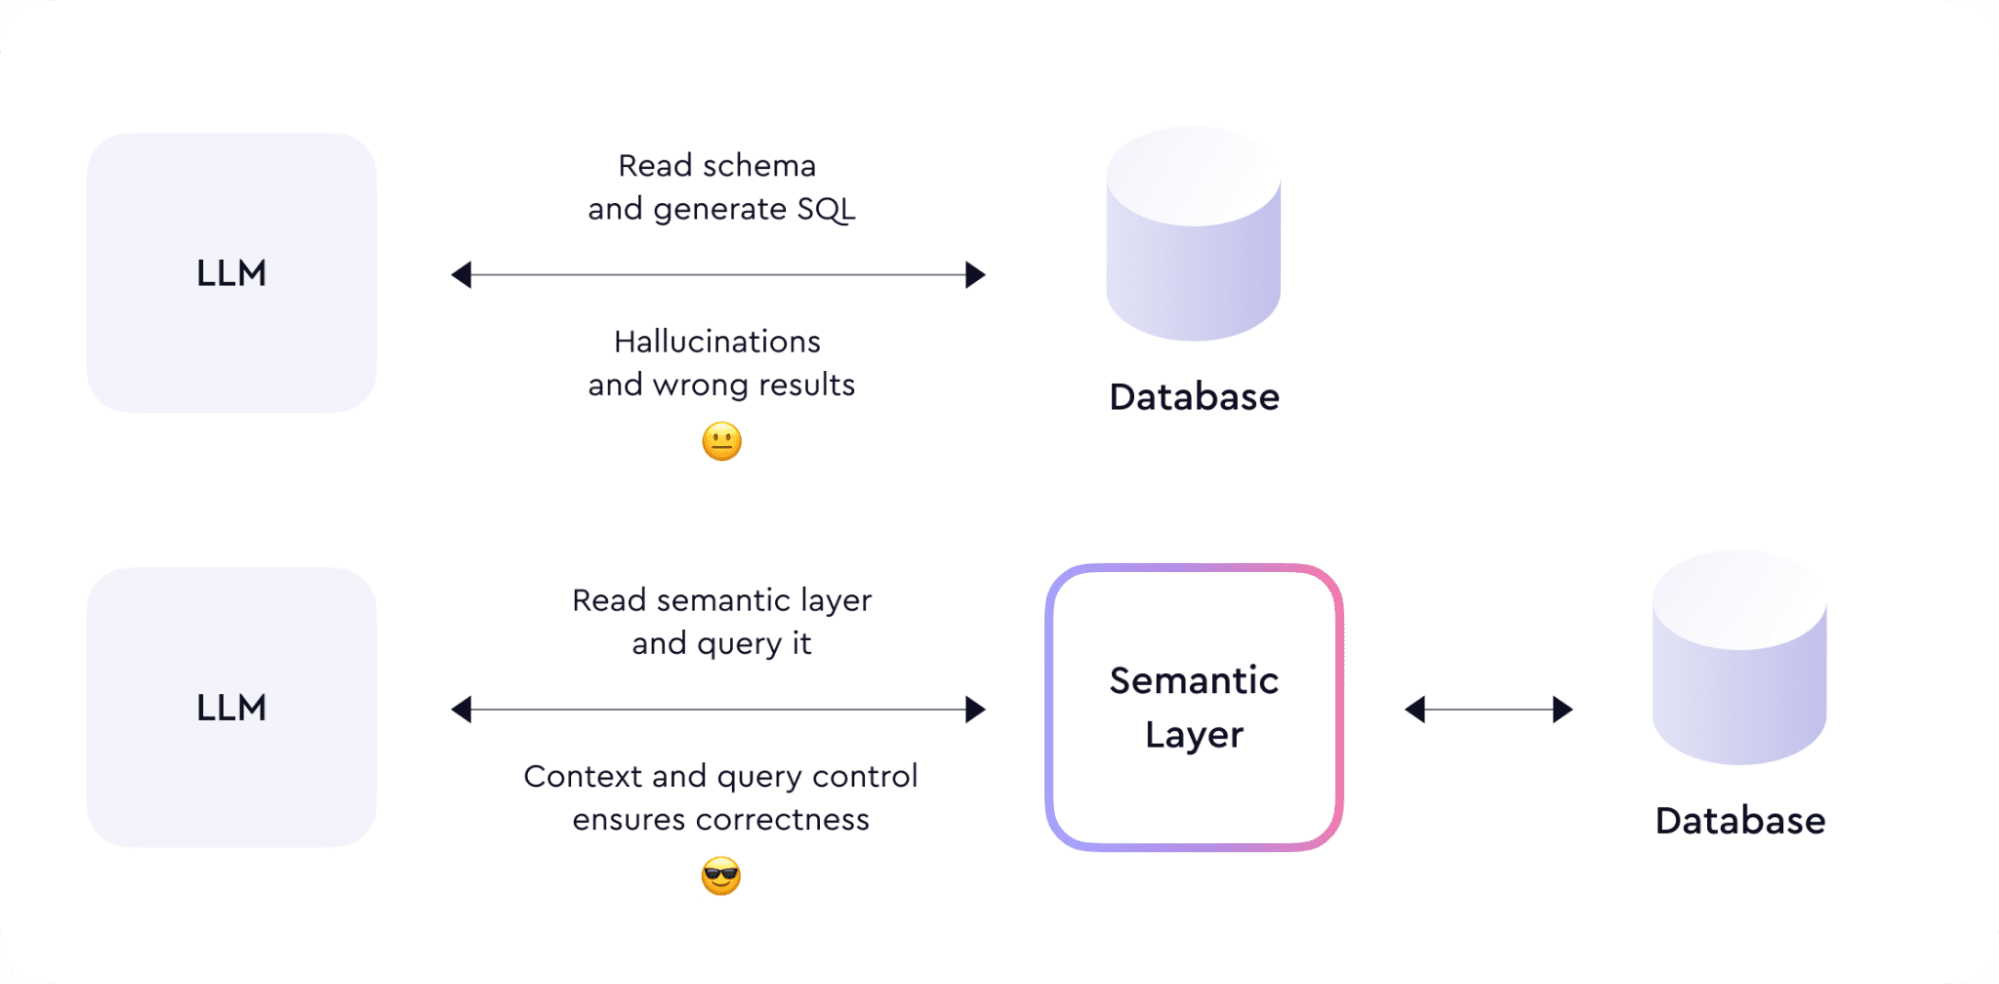 Semantic Layers are the Missing Piece for AI-Enabled Analytics